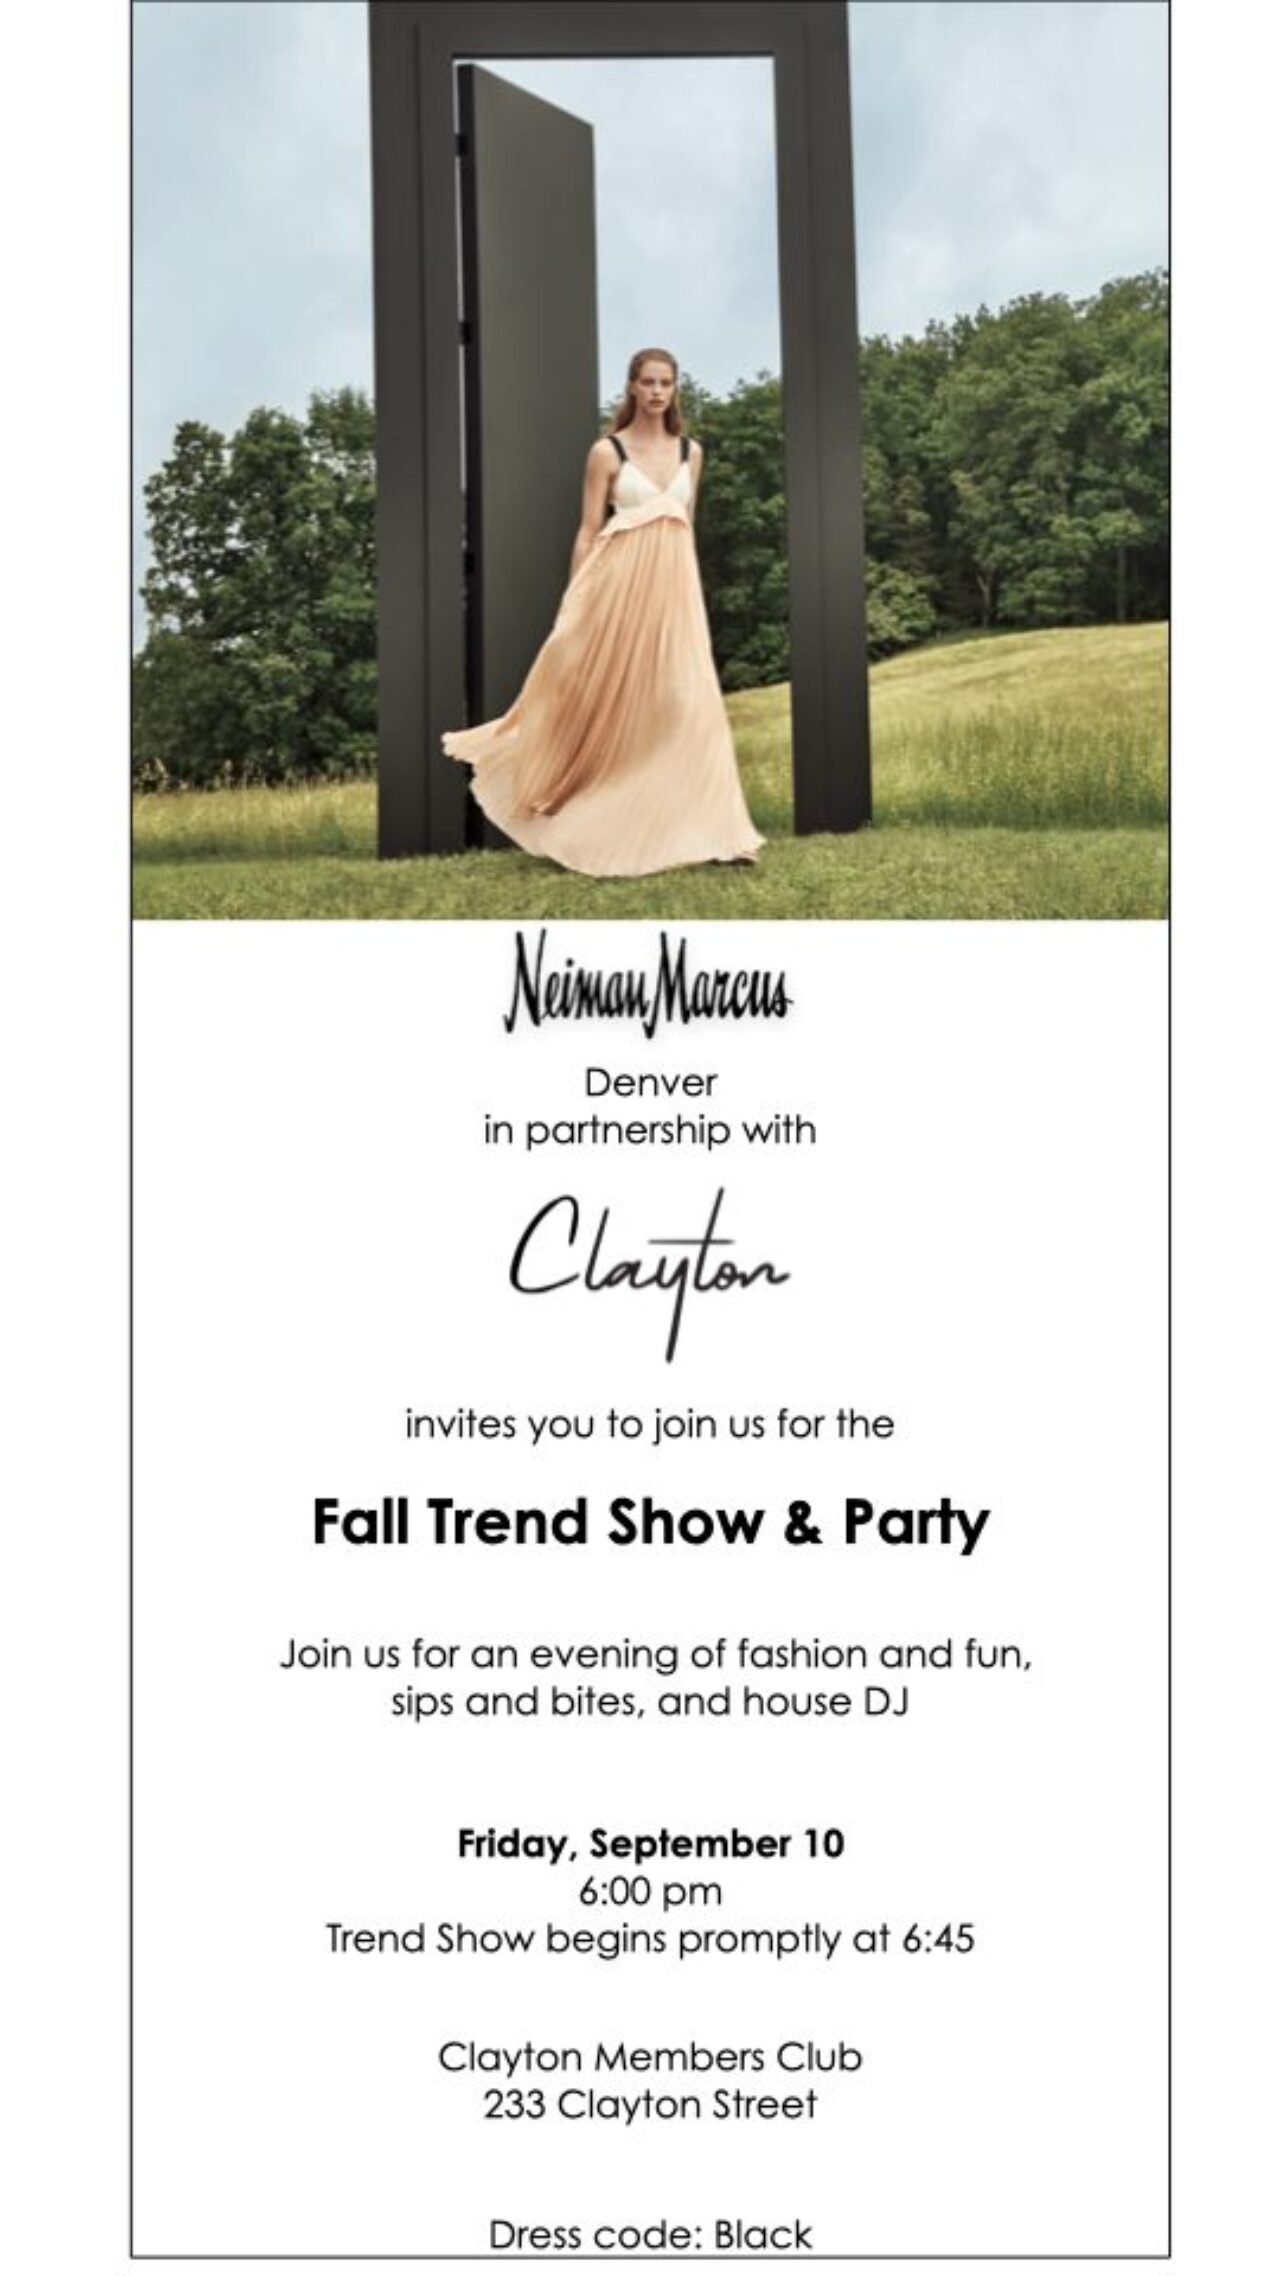 Nieman Marcus Fall Trend Show & Party Flyer held at the Clayton Members Club in Cherry Creek, CO